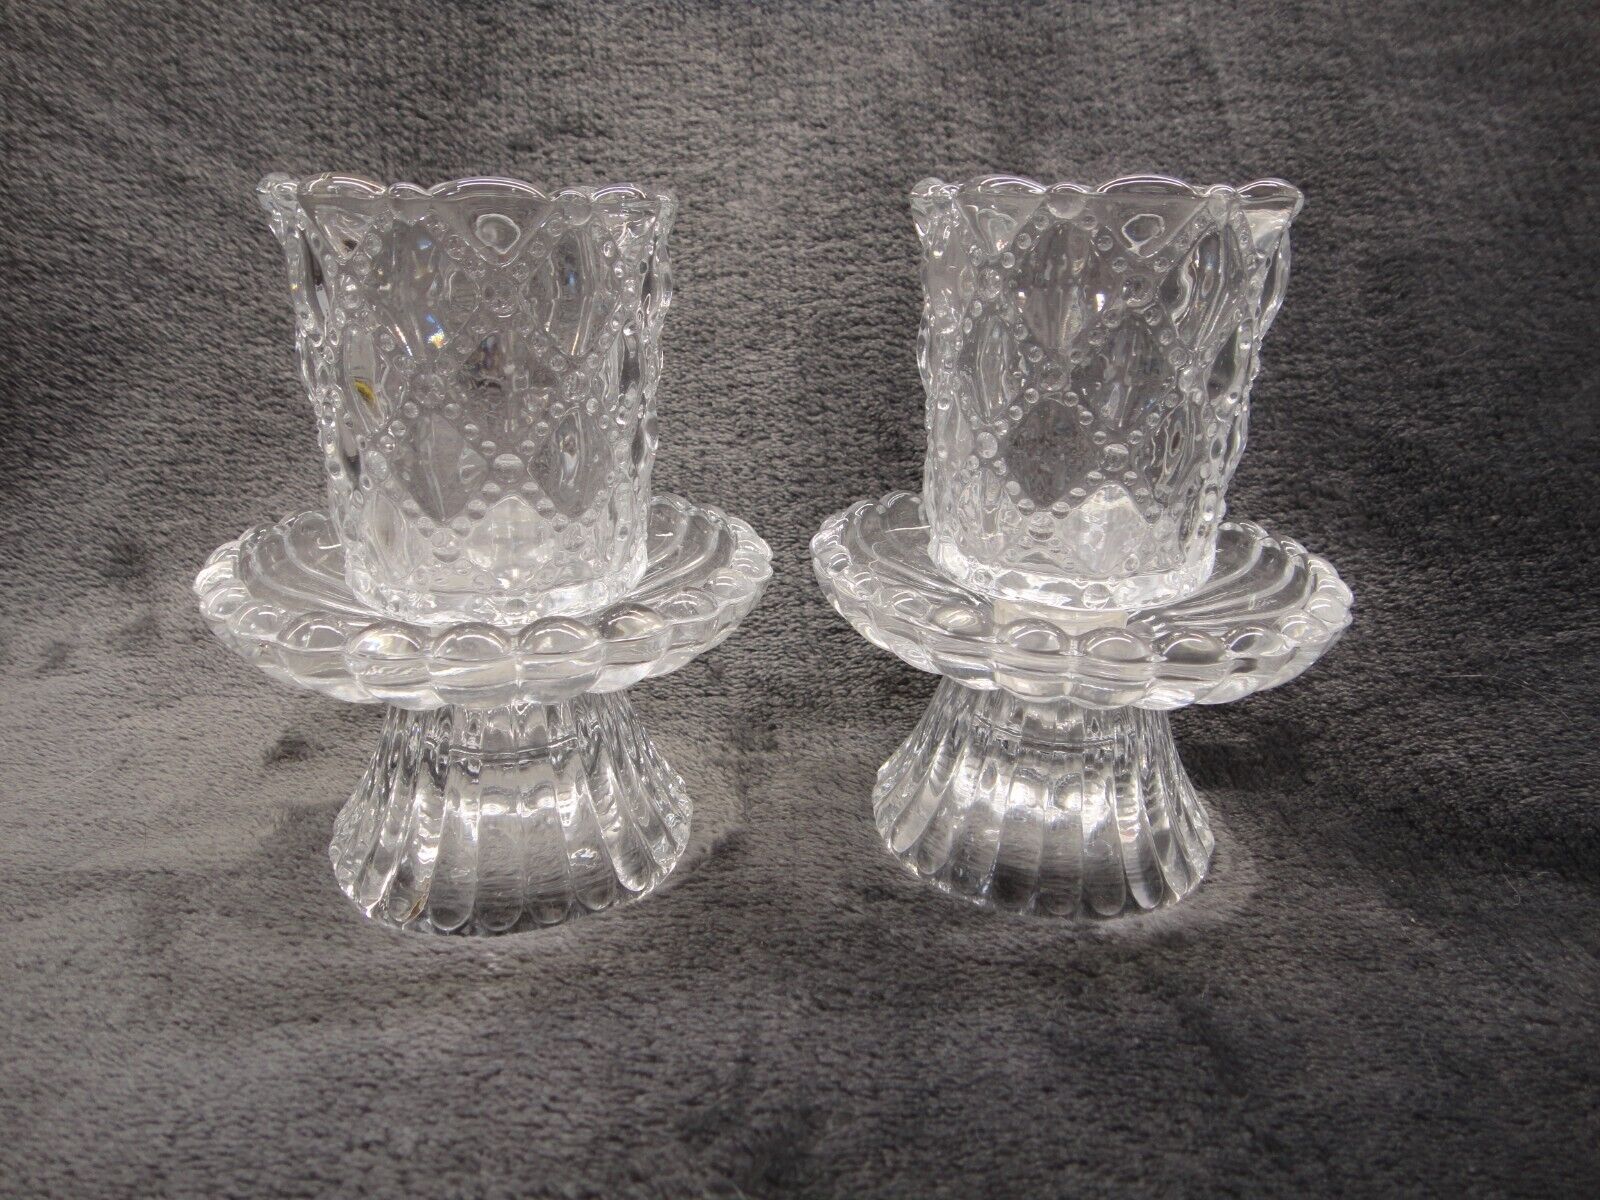 Set Of 2 Partylite Votive Taper Tealight - 2 Piece Clear Crystal Candle Holders